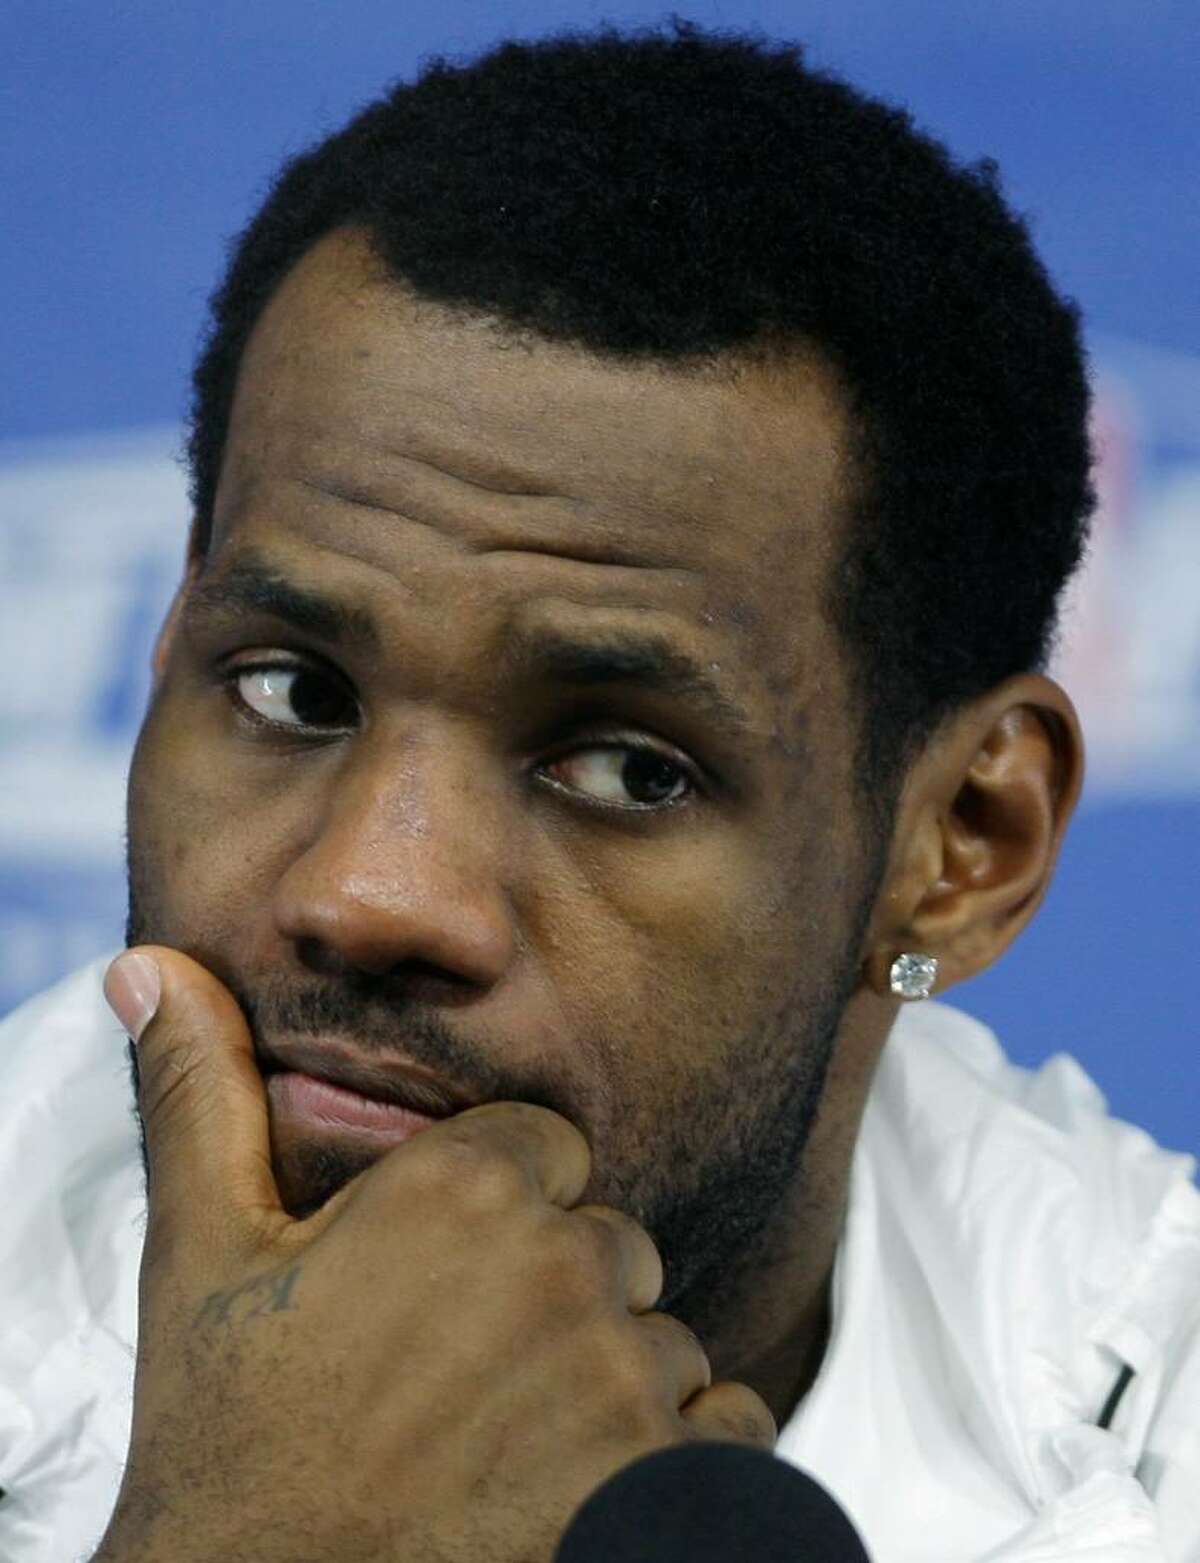 Report: Knicks Were LeBron James' 1st Choice in 2010, But Meeting